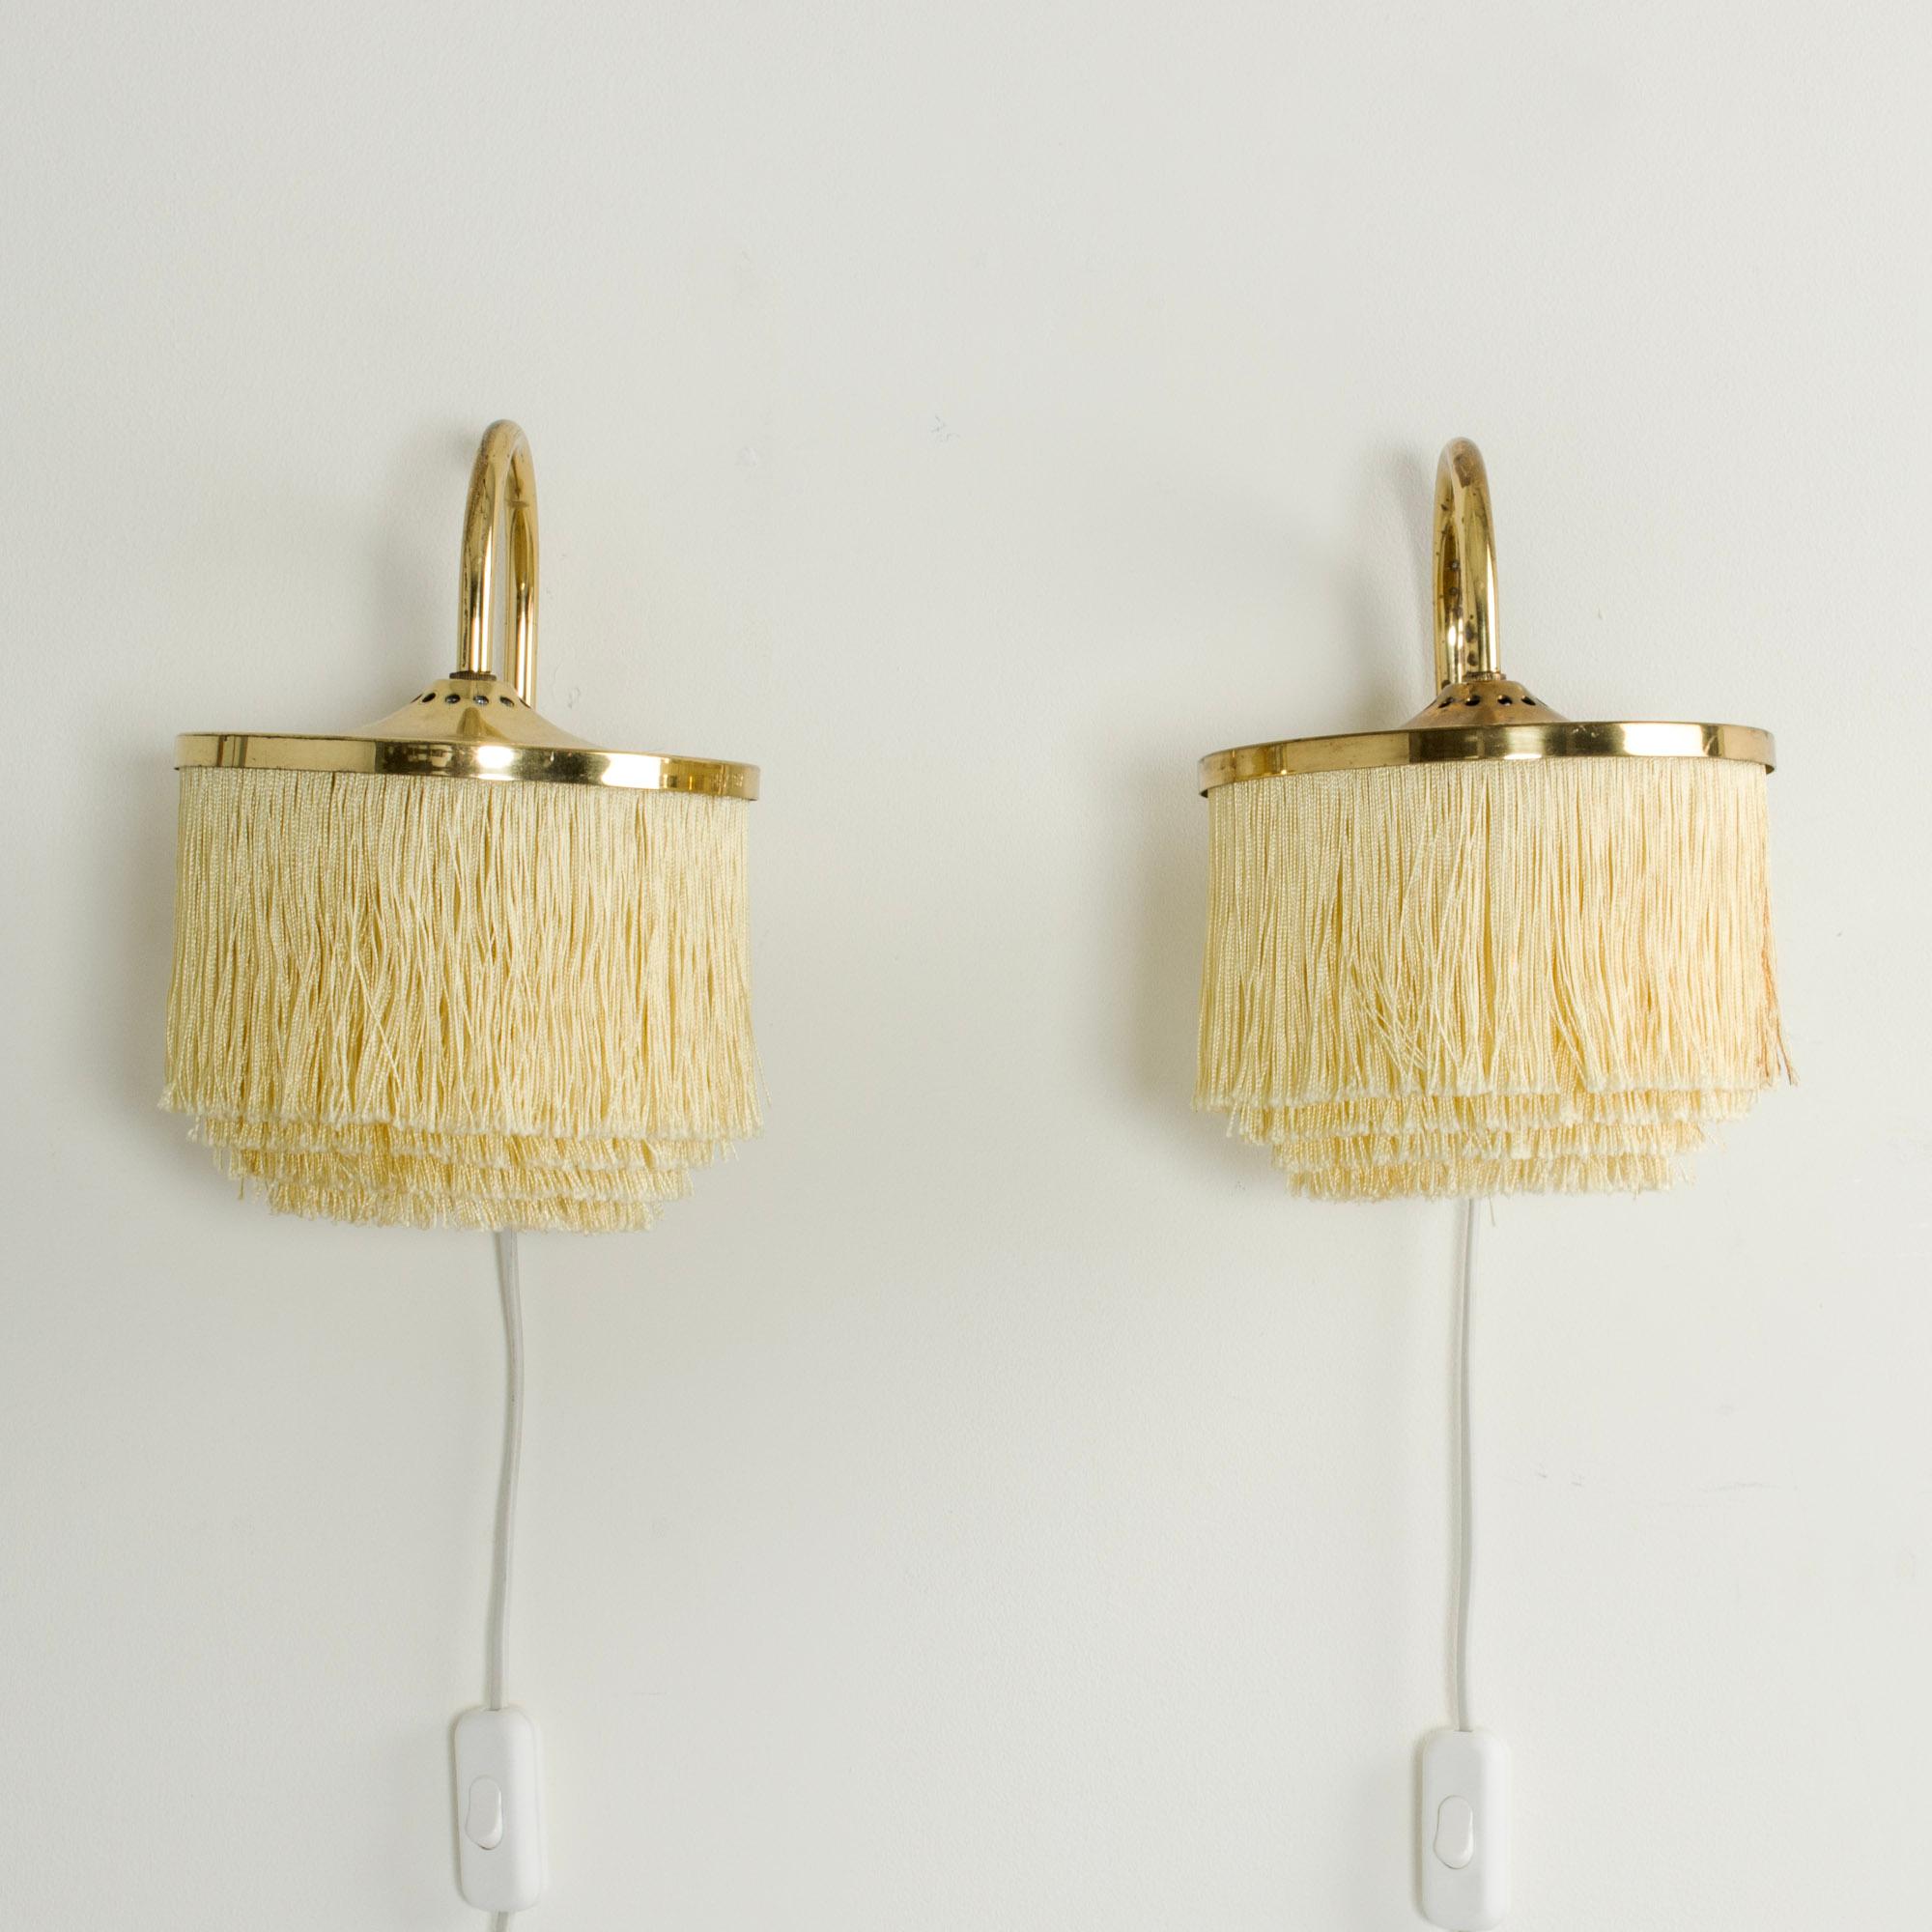 Pair of “Fringe” wall lights by Hans-Agne Jakobsson, made from brass. Drapes of textile chords are suspended in layers from shade. Great mood light.